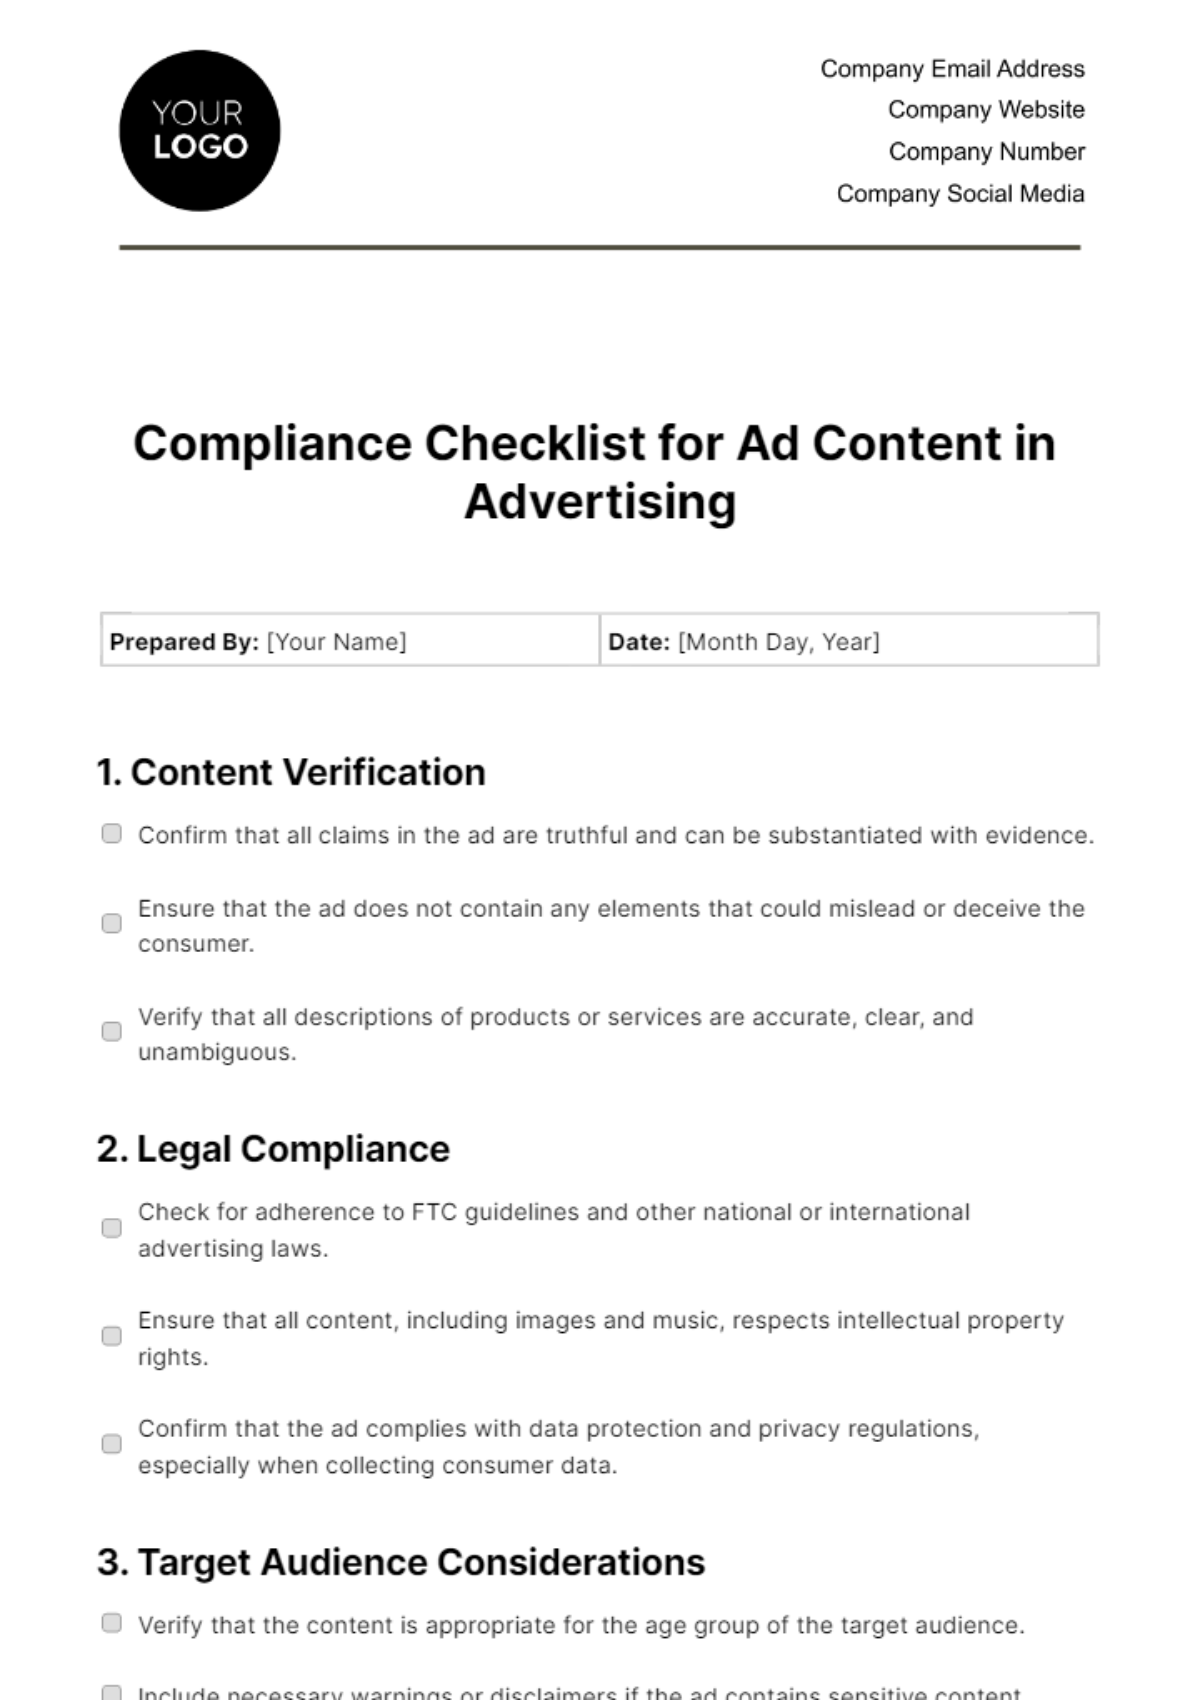 Free Compliance Checklist for Ad Content in Advertising Template